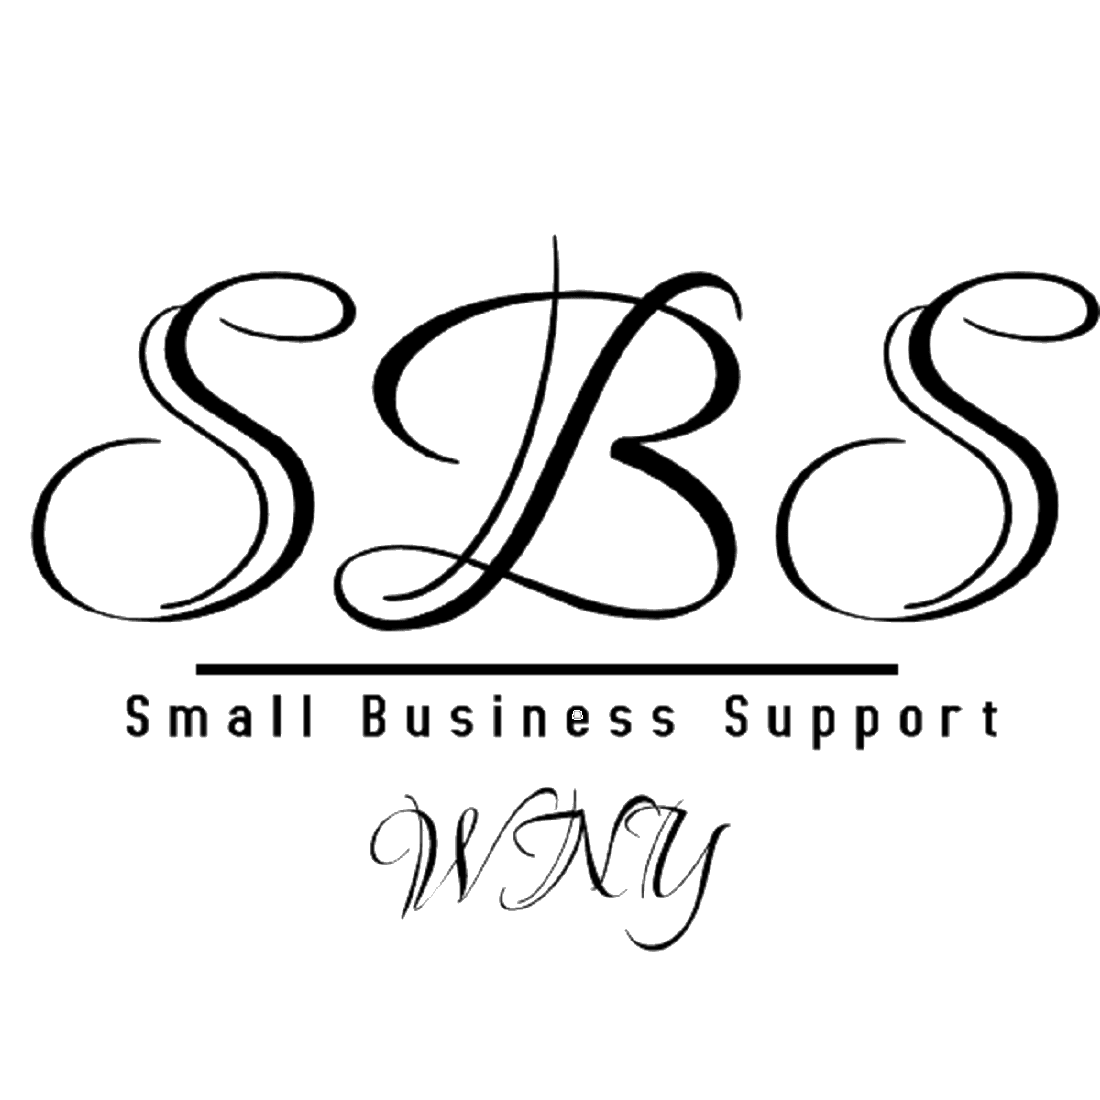 Small Business Support WNY